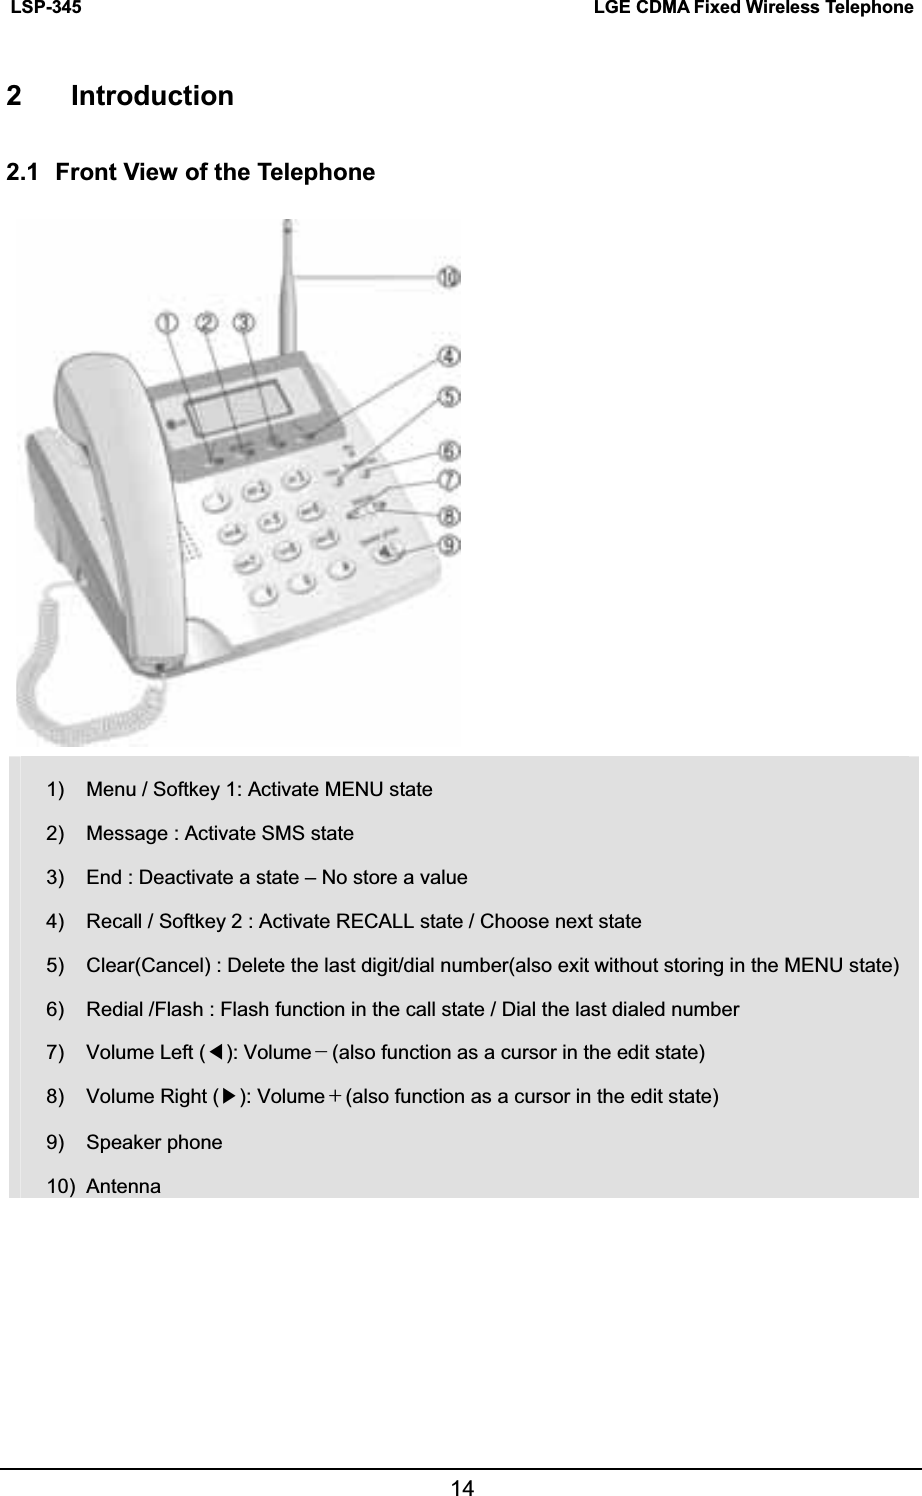 LSP-345  LGE CDMA Fixed Wireless Telephone142 Introduction 2.1  Front View of the Telephone 1)  Menu / Softkey 1: Activate MENU state       2)  Message : Activate SMS state 3)  End : Deactivate a state – No store a value     4)  Recall / Softkey 2 : Activate RECALL state / Choose next state 5)  Clear(Cancel) : Delete the last digit/dial number(also exit without storing in the MENU state) 6)  Redial /Flash : Flash function in the call state / Dial the last dialed number 7)  Volume Left (ൖ): Volume୉(also function as a cursor in the edit state) 8)  Volume Right (൘): Volumeେ(also function as a cursor in the edit state) 9) Speaker phone  10) Antenna 